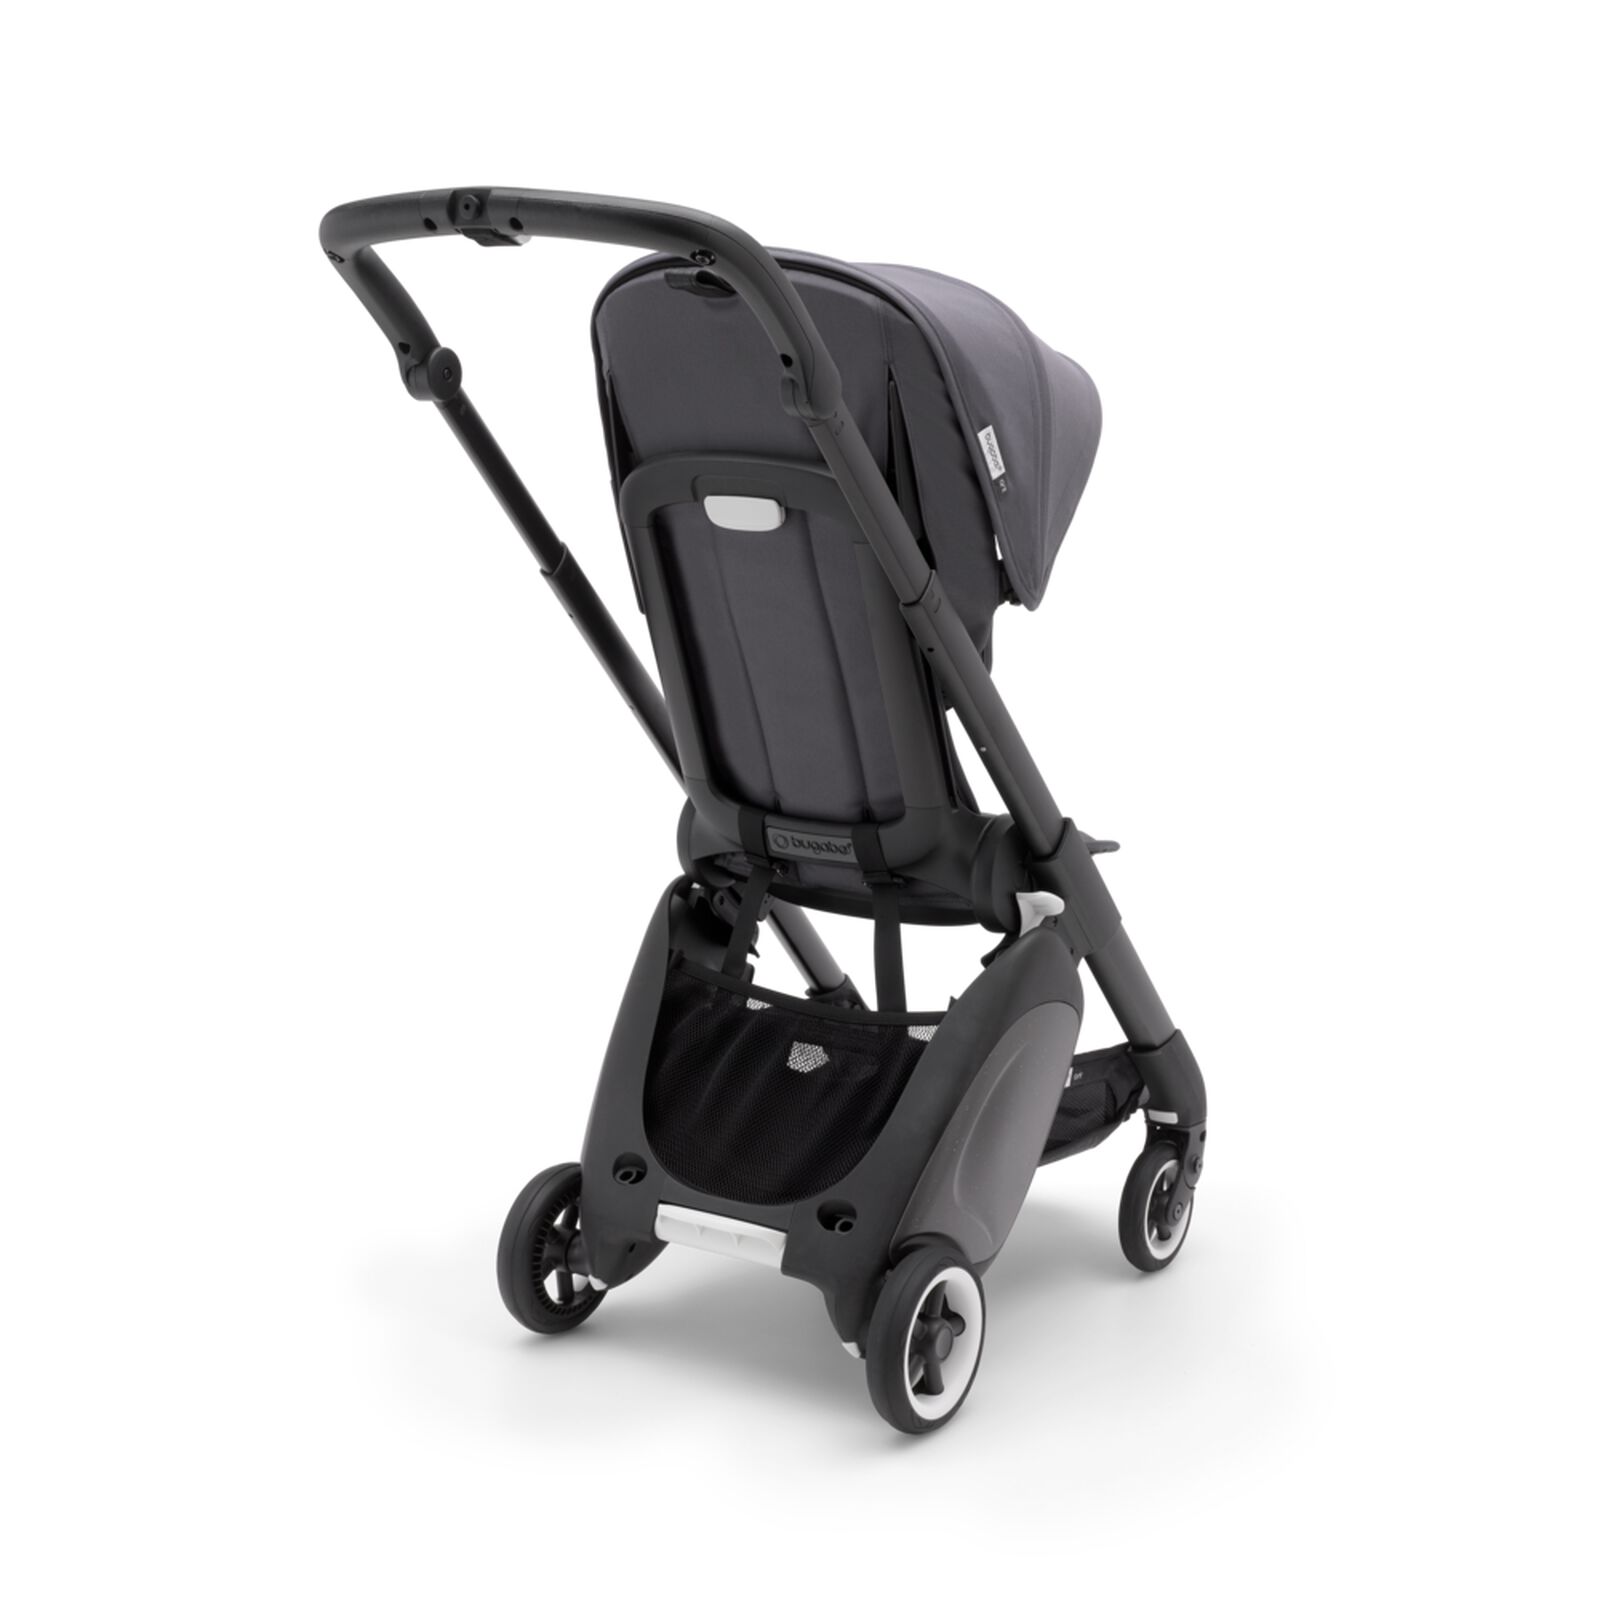 Bugaboo Ant carry strap - View 3